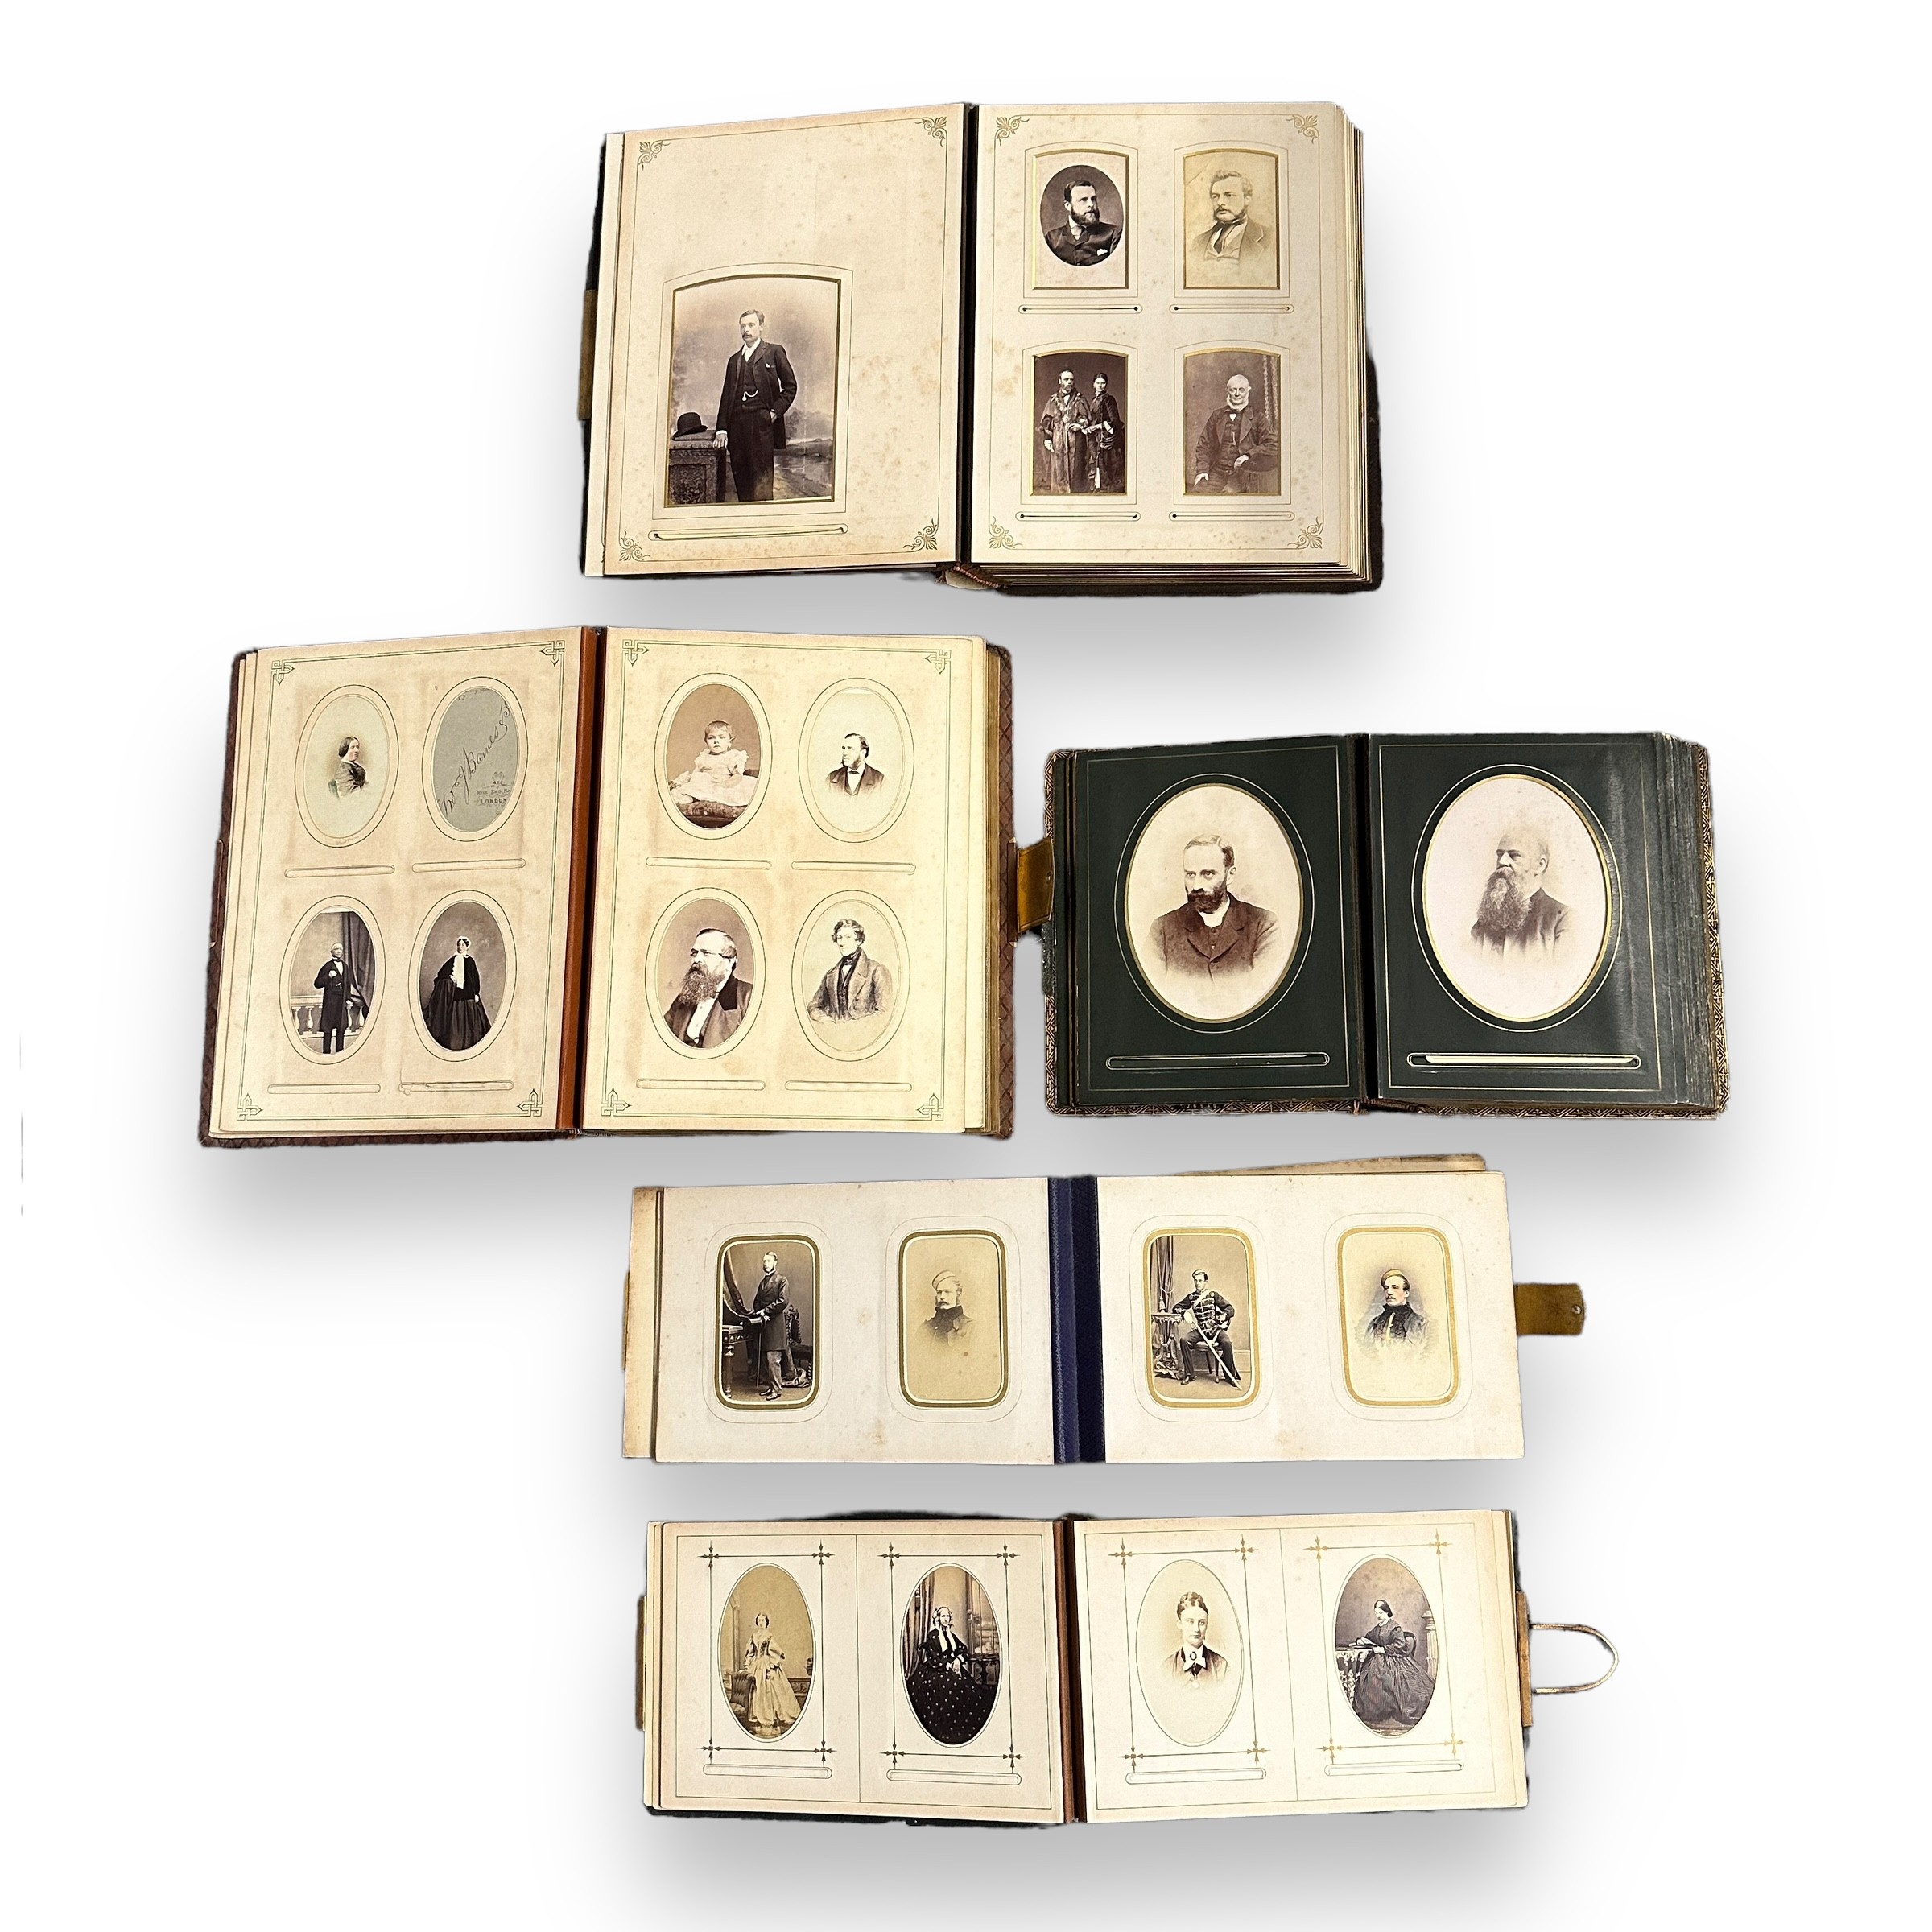 A collection of Victorian photographic cabinet cards / Cartes de Visite, with 151 cards in 3